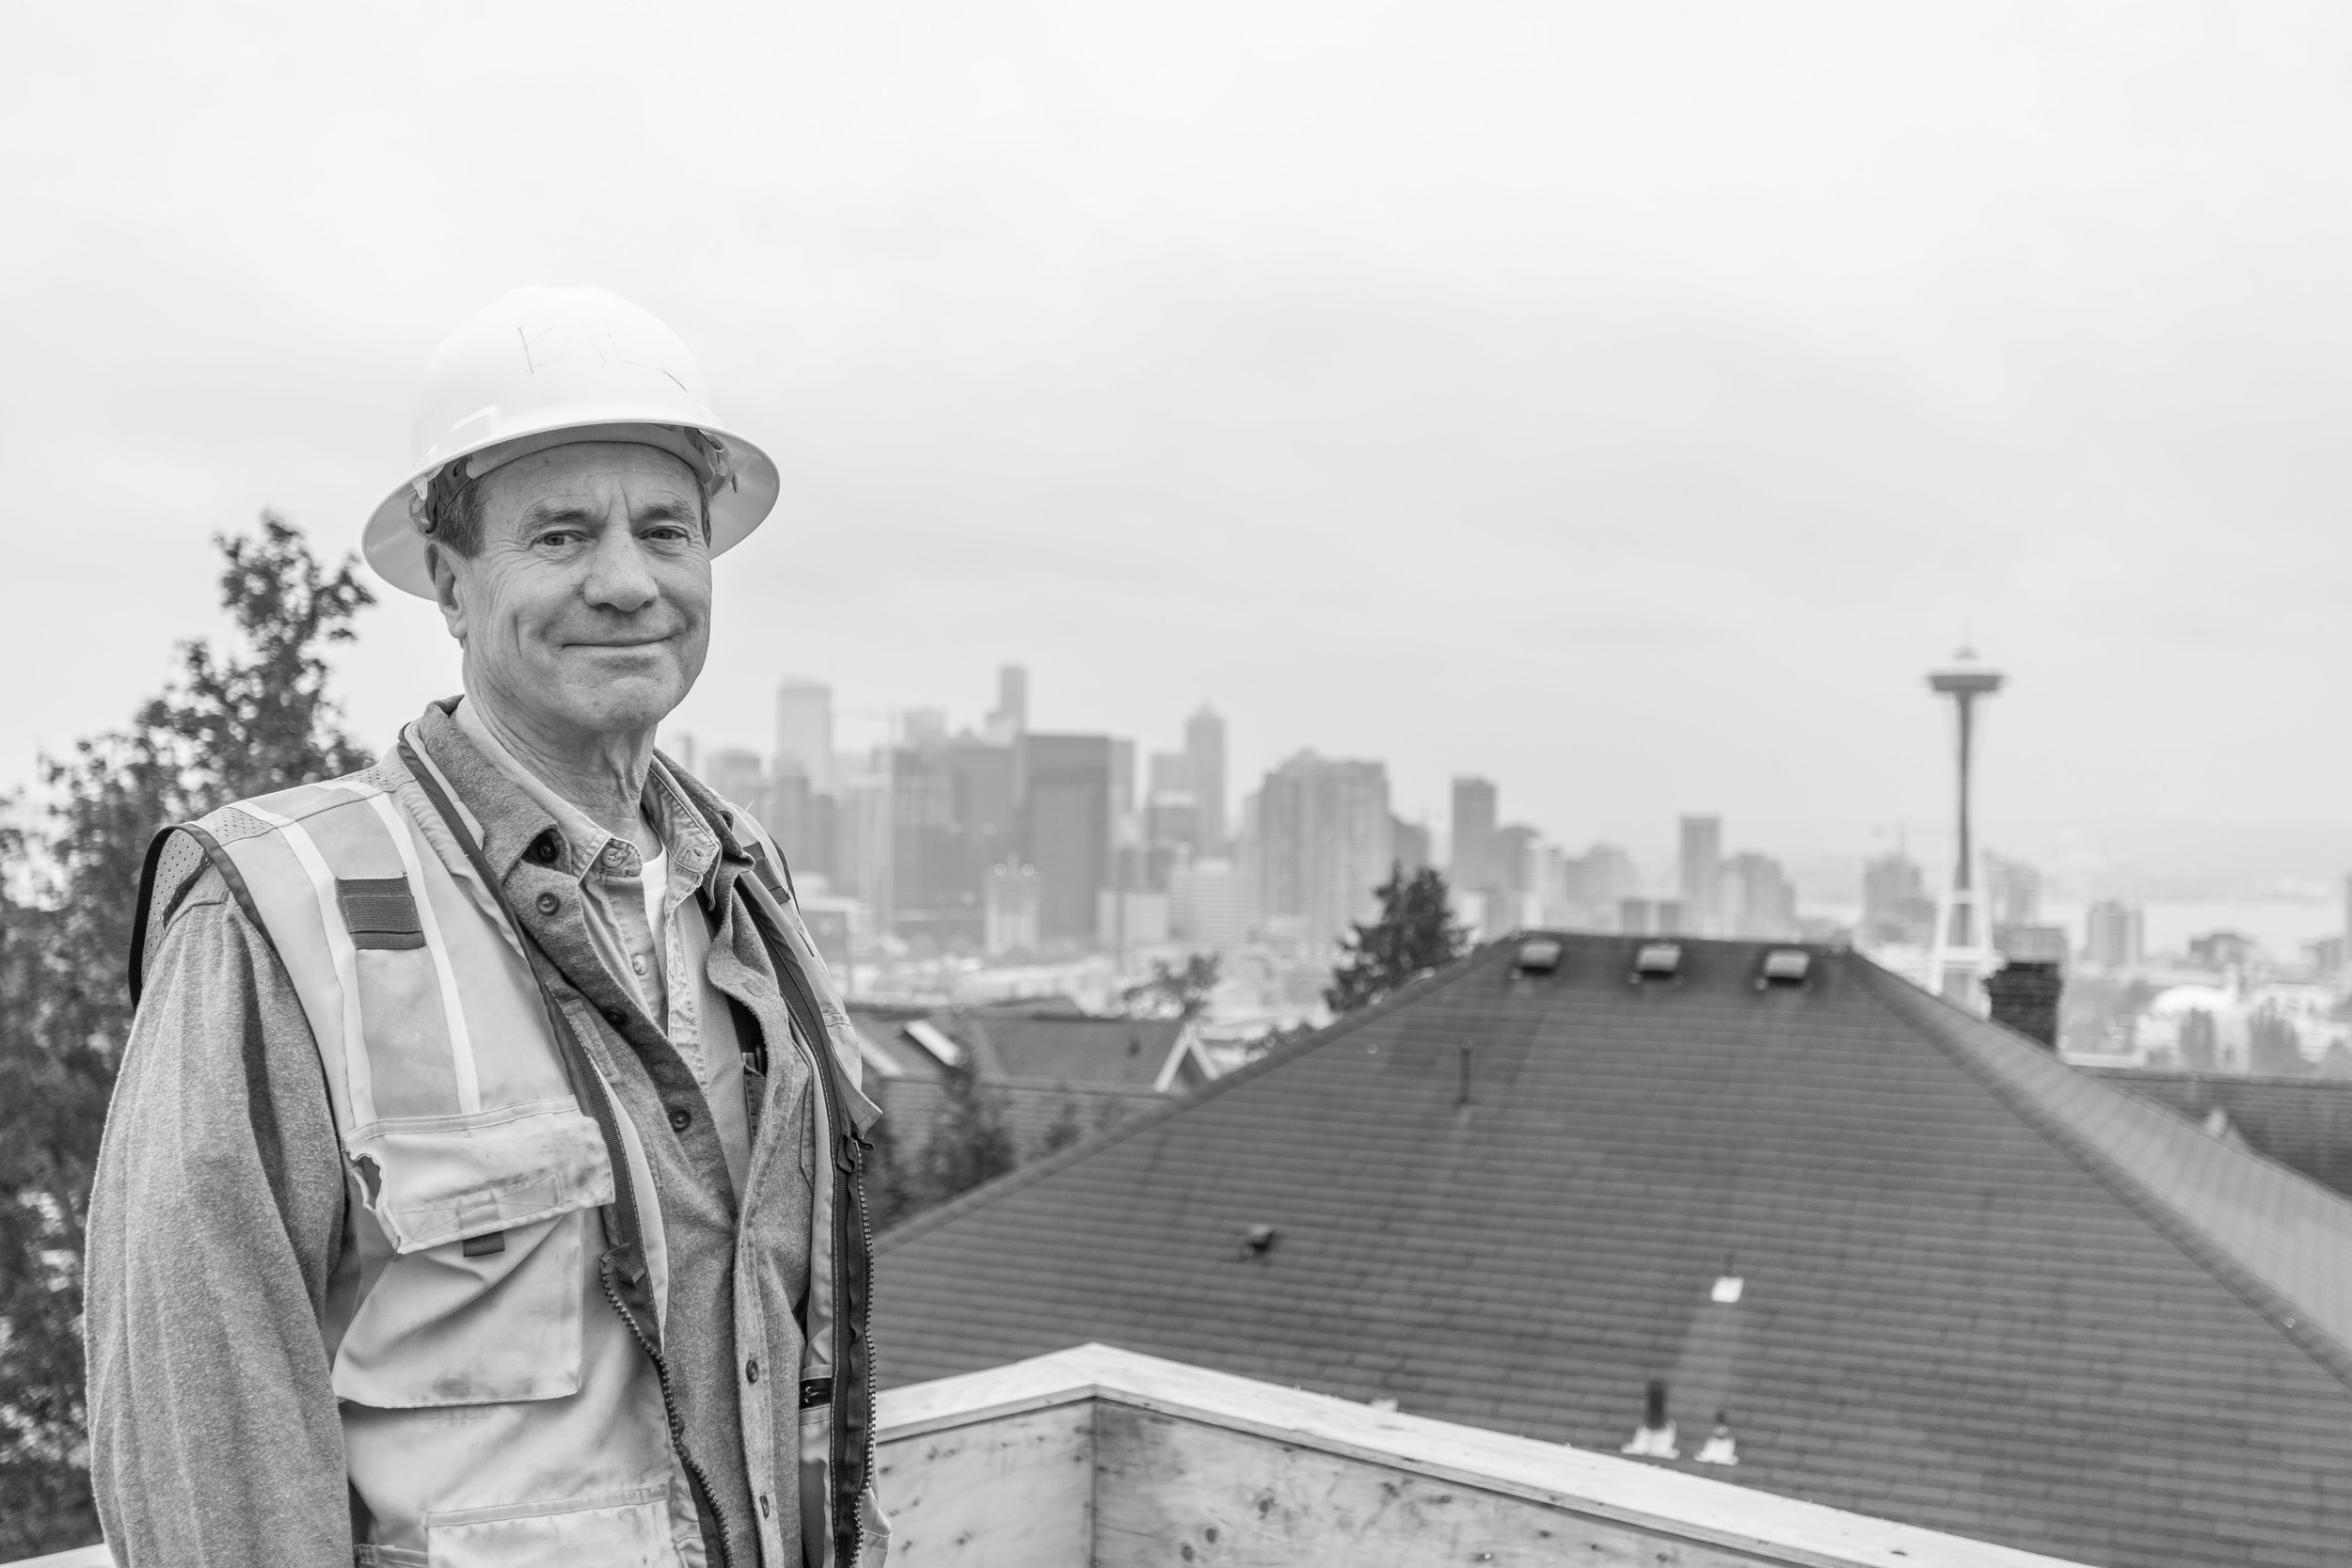 Bill Parks, Atop Lee Street Lofts During Construction